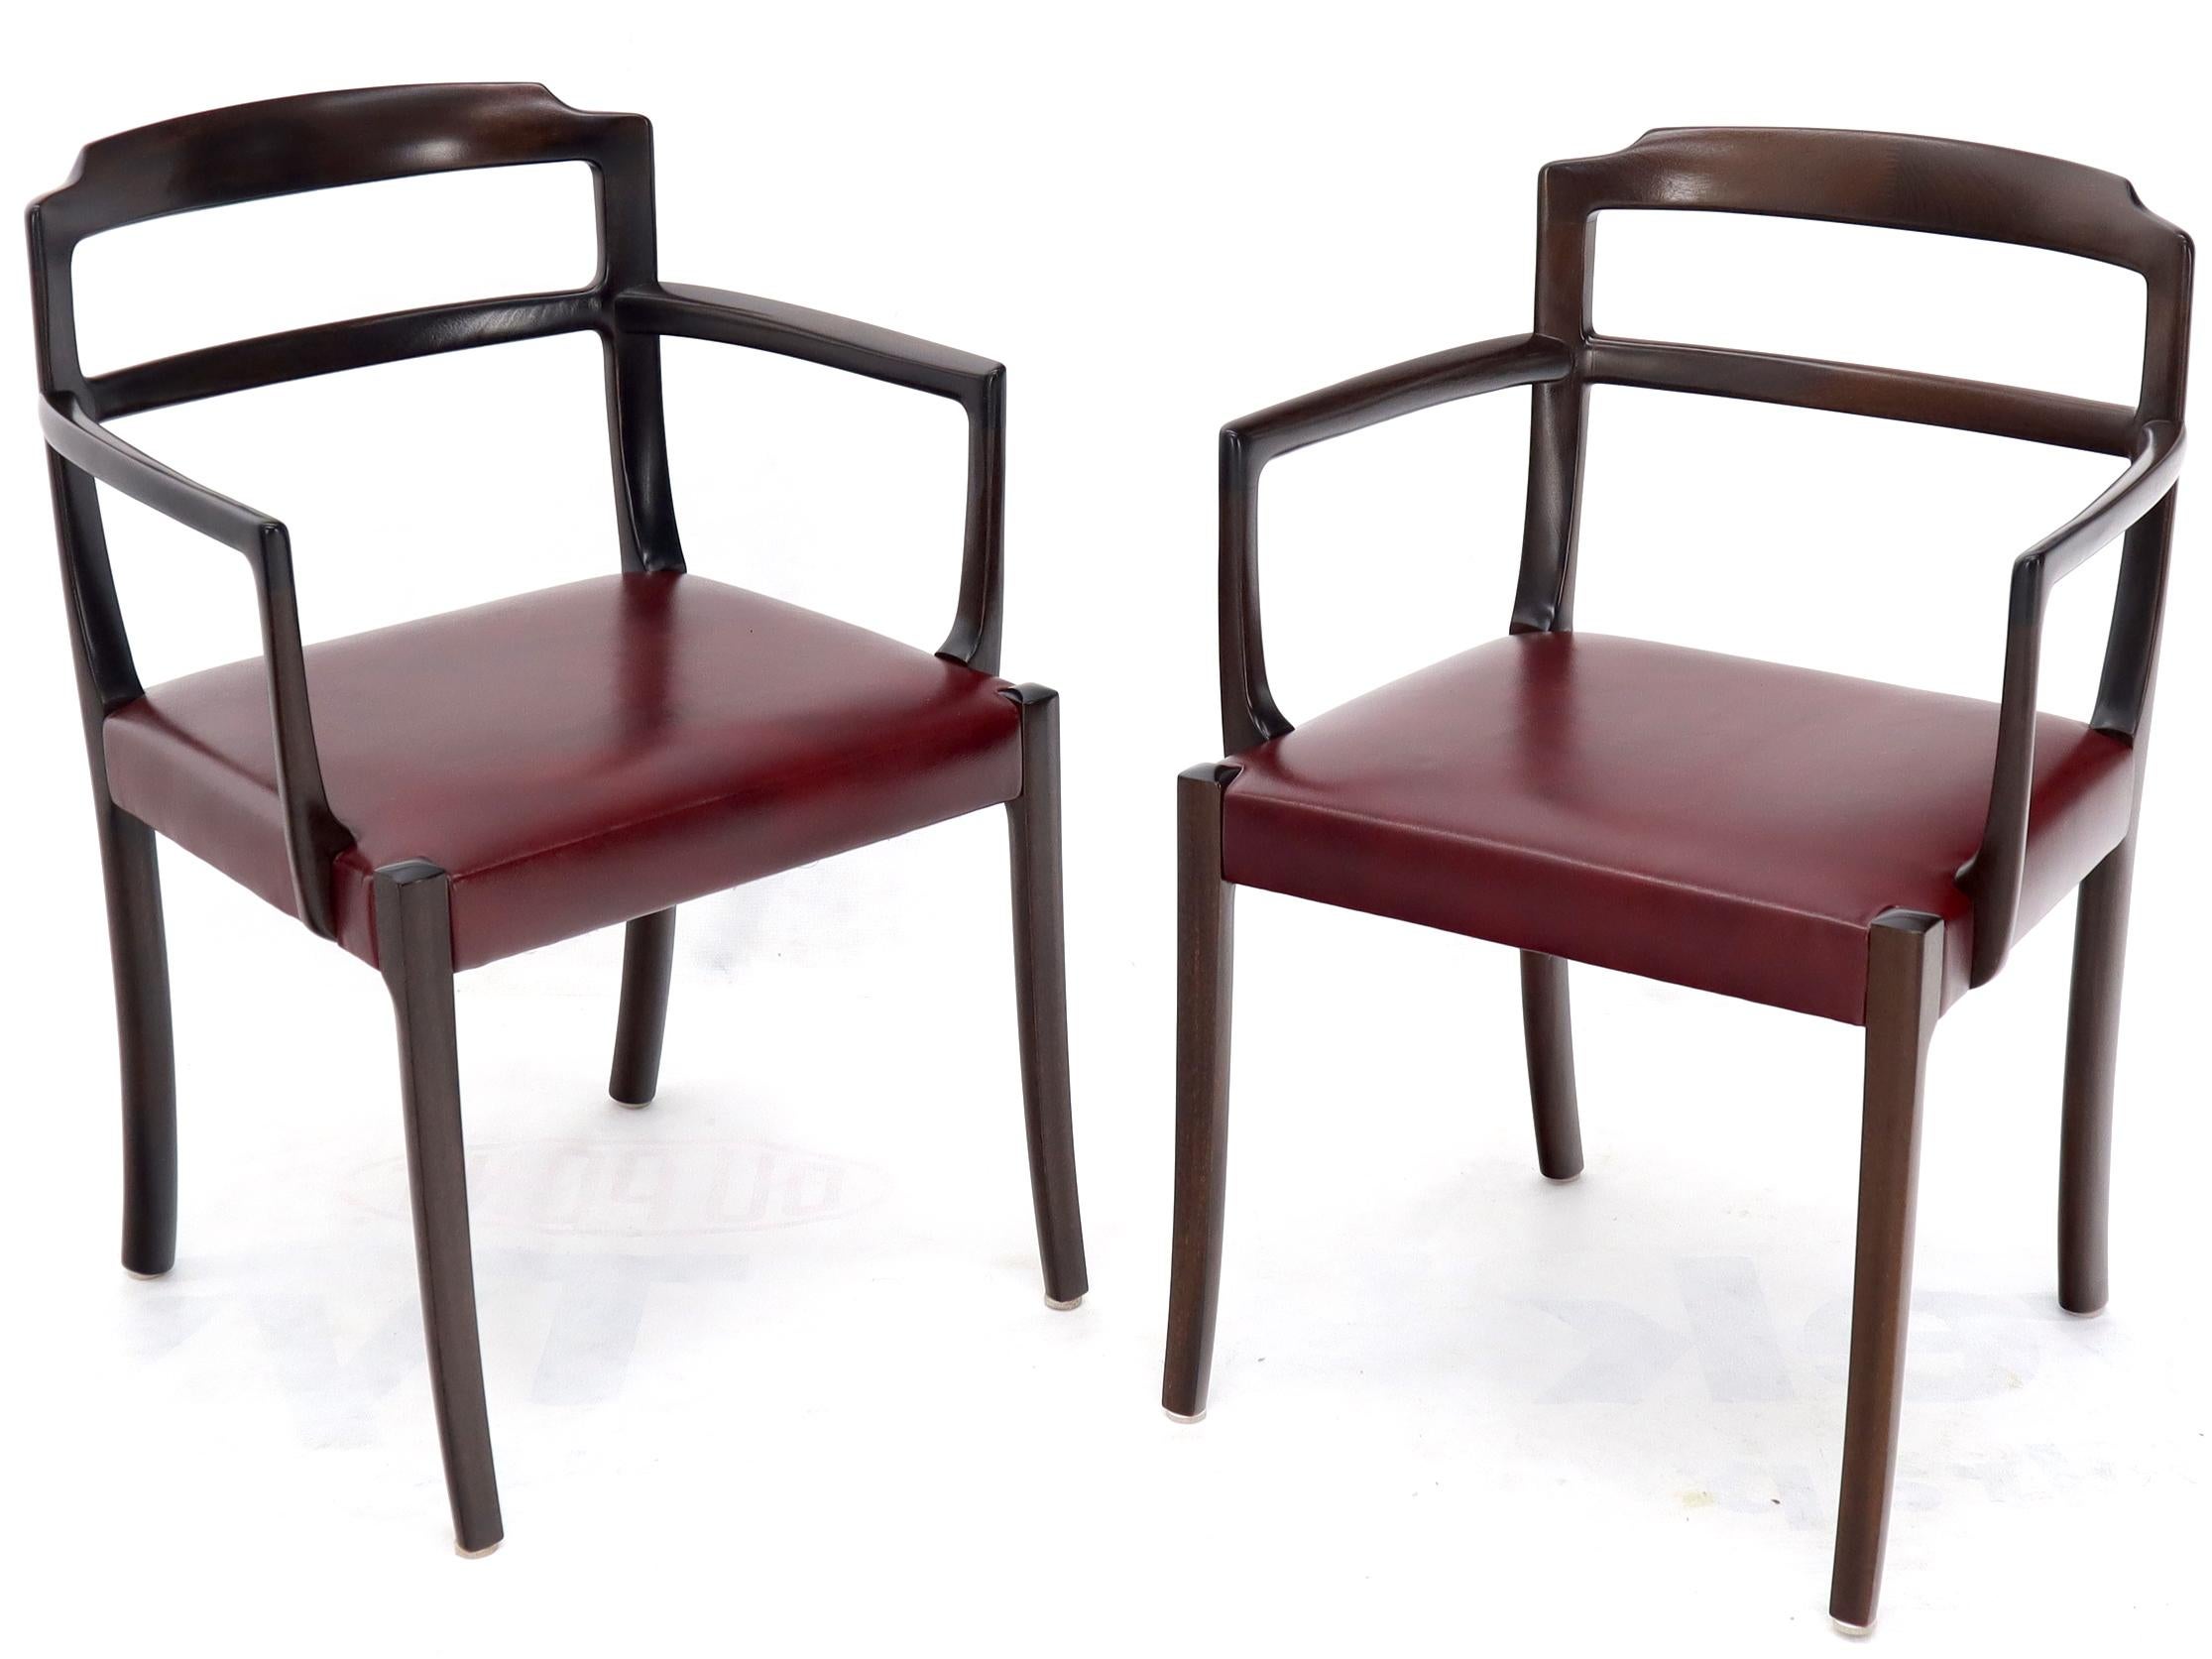 20th Century Set of 8 Eight Rosewood Danish Mid-Century Modern Dining Chairs with Arms